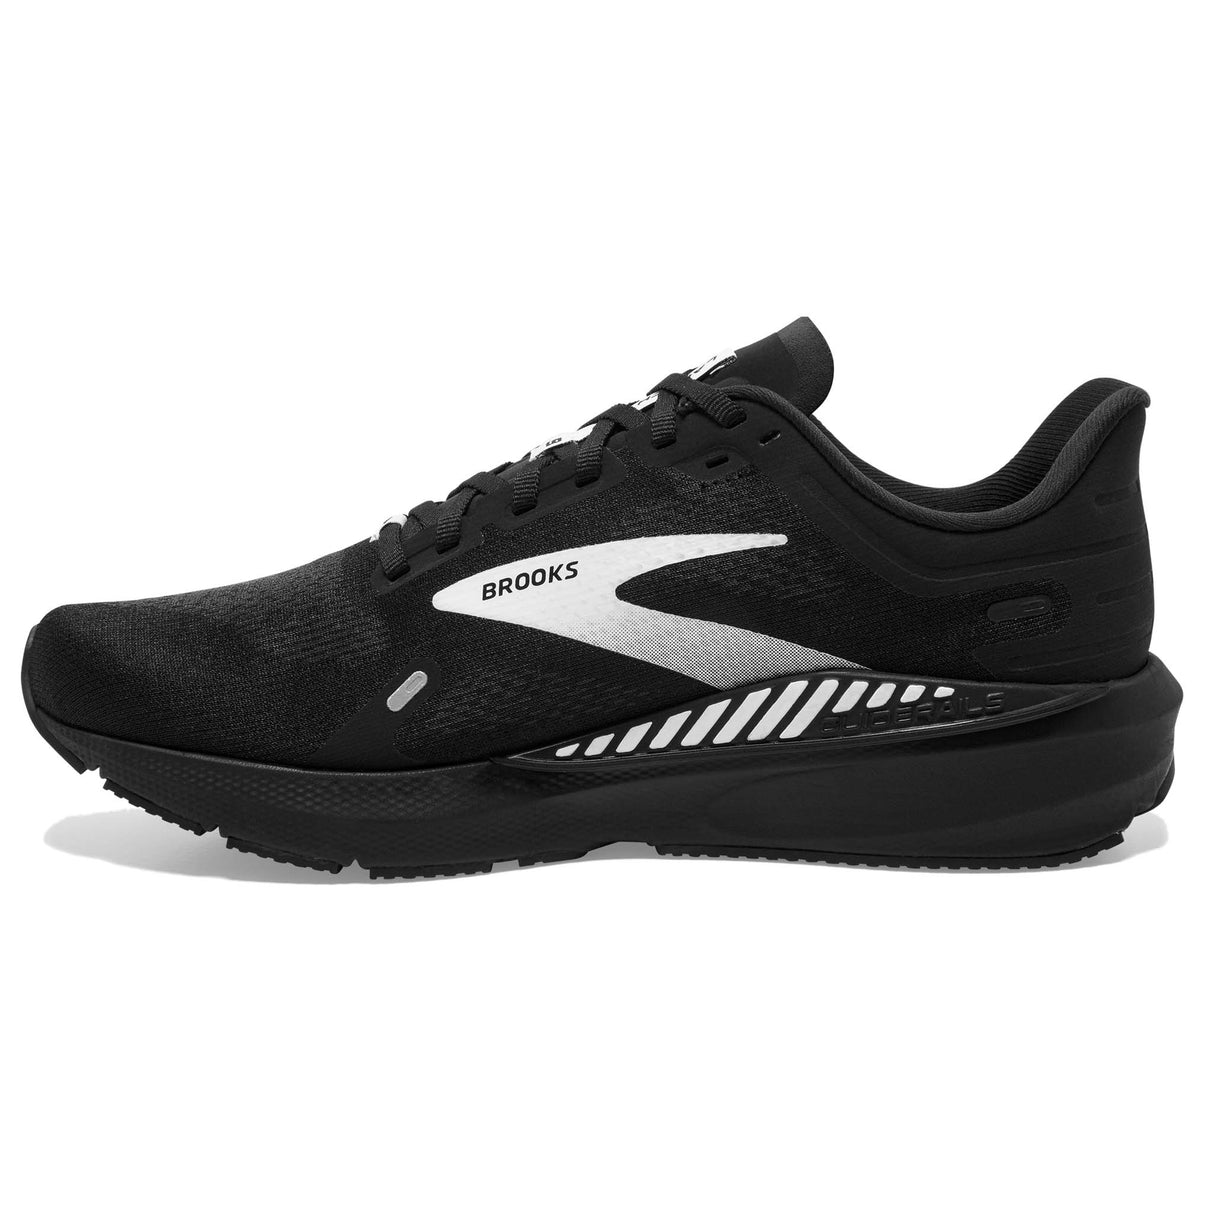 Brooks Launch GTS 9 running homme noir blanc lateral